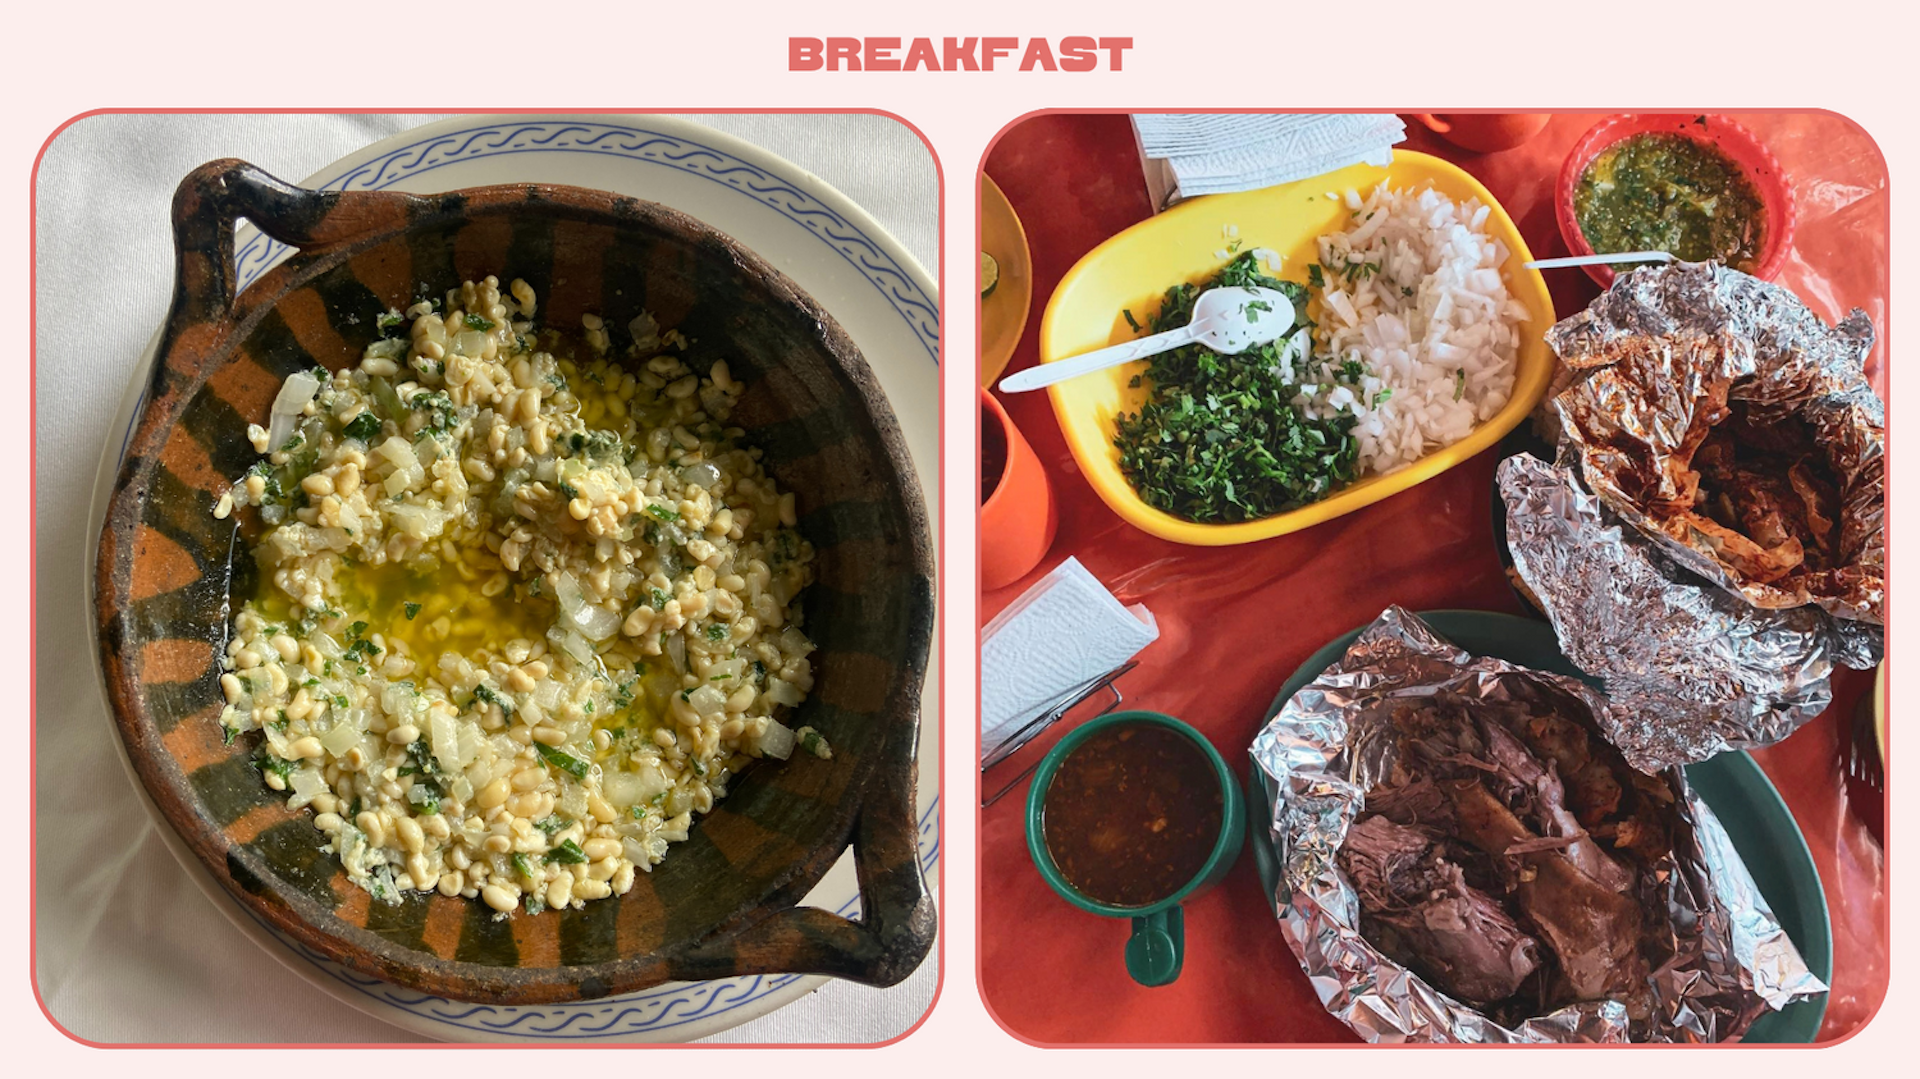 Left: A traditional Mexican breakfast bowl of ant larva. Right: Plates of dishes from a market bbq meal